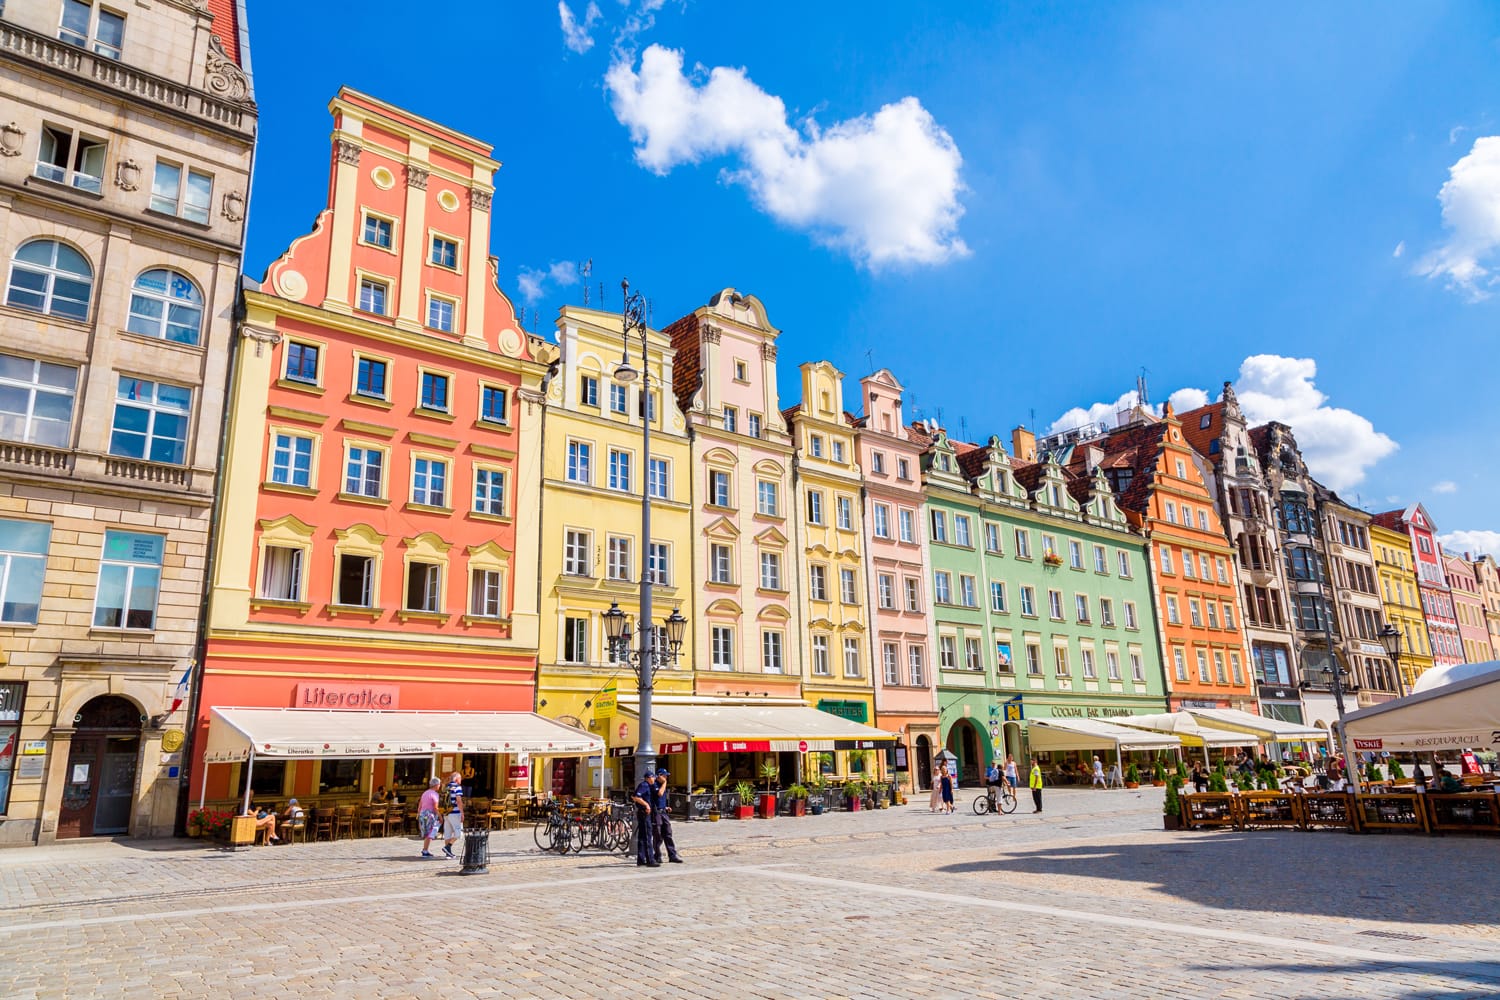 City center and Market Square in Wroclaw, Poland